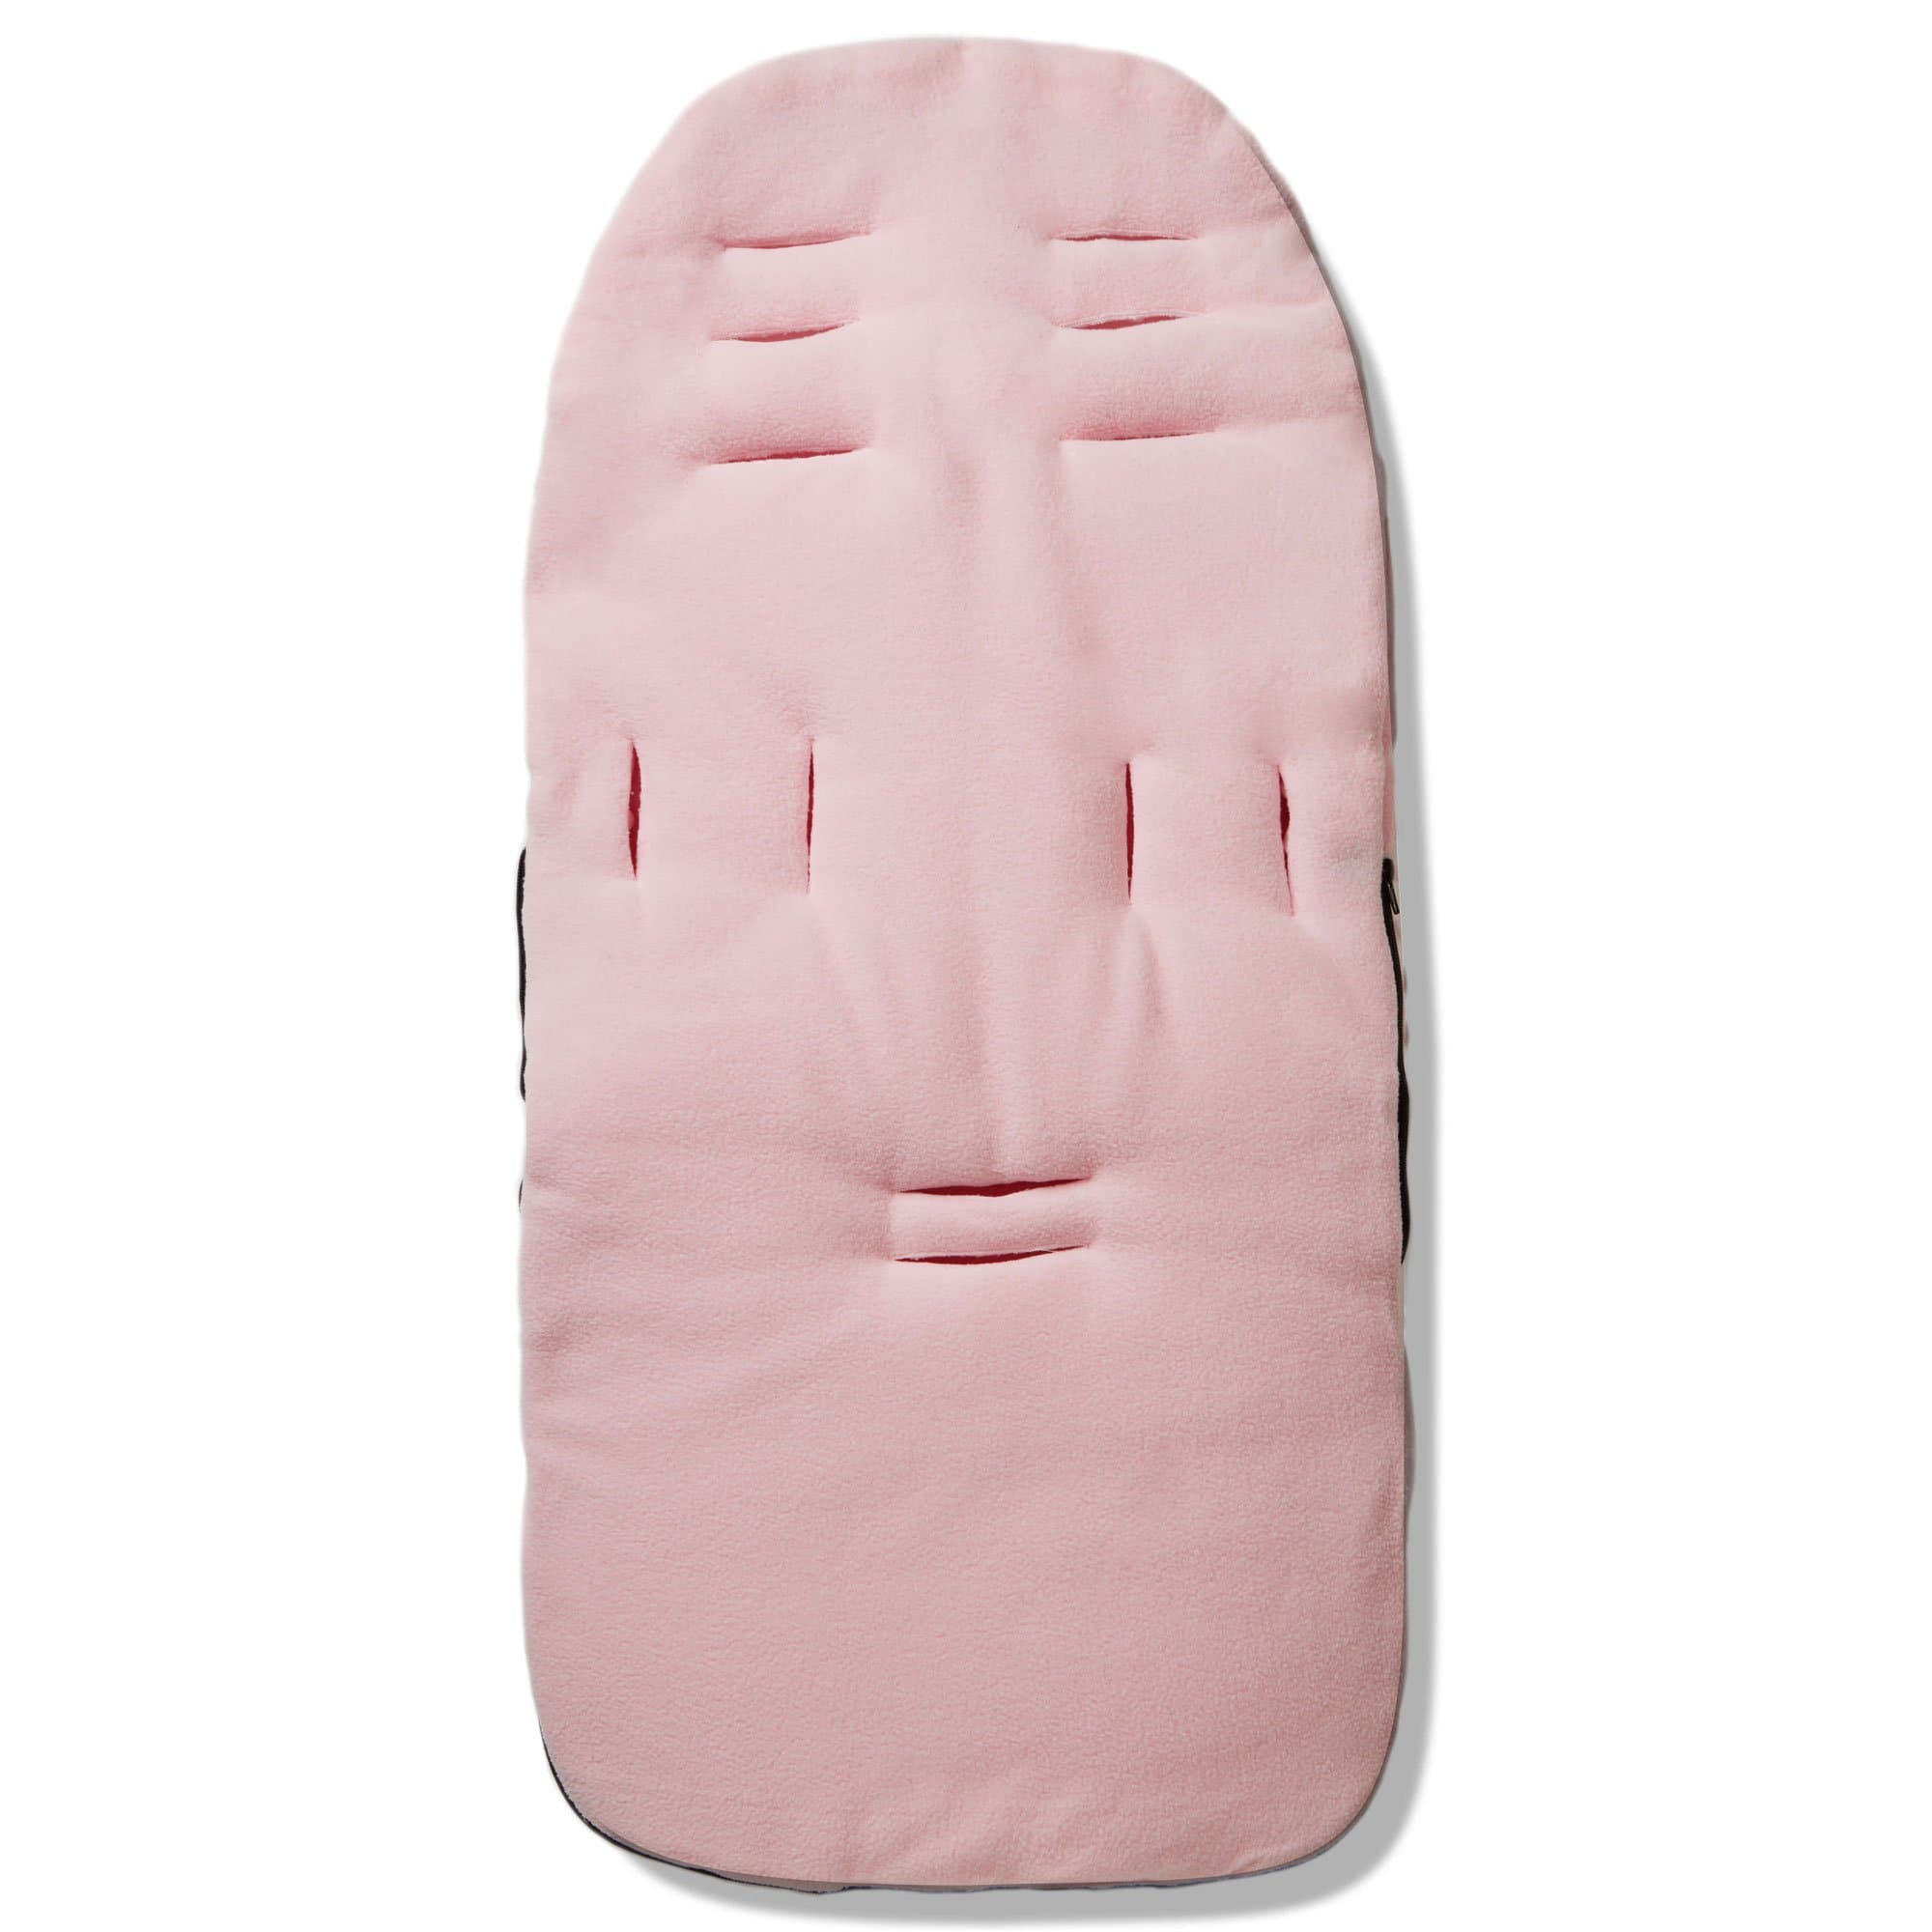 Dimple Footmuff / Cosy Toes Compatible with Hauck - For Your Little One